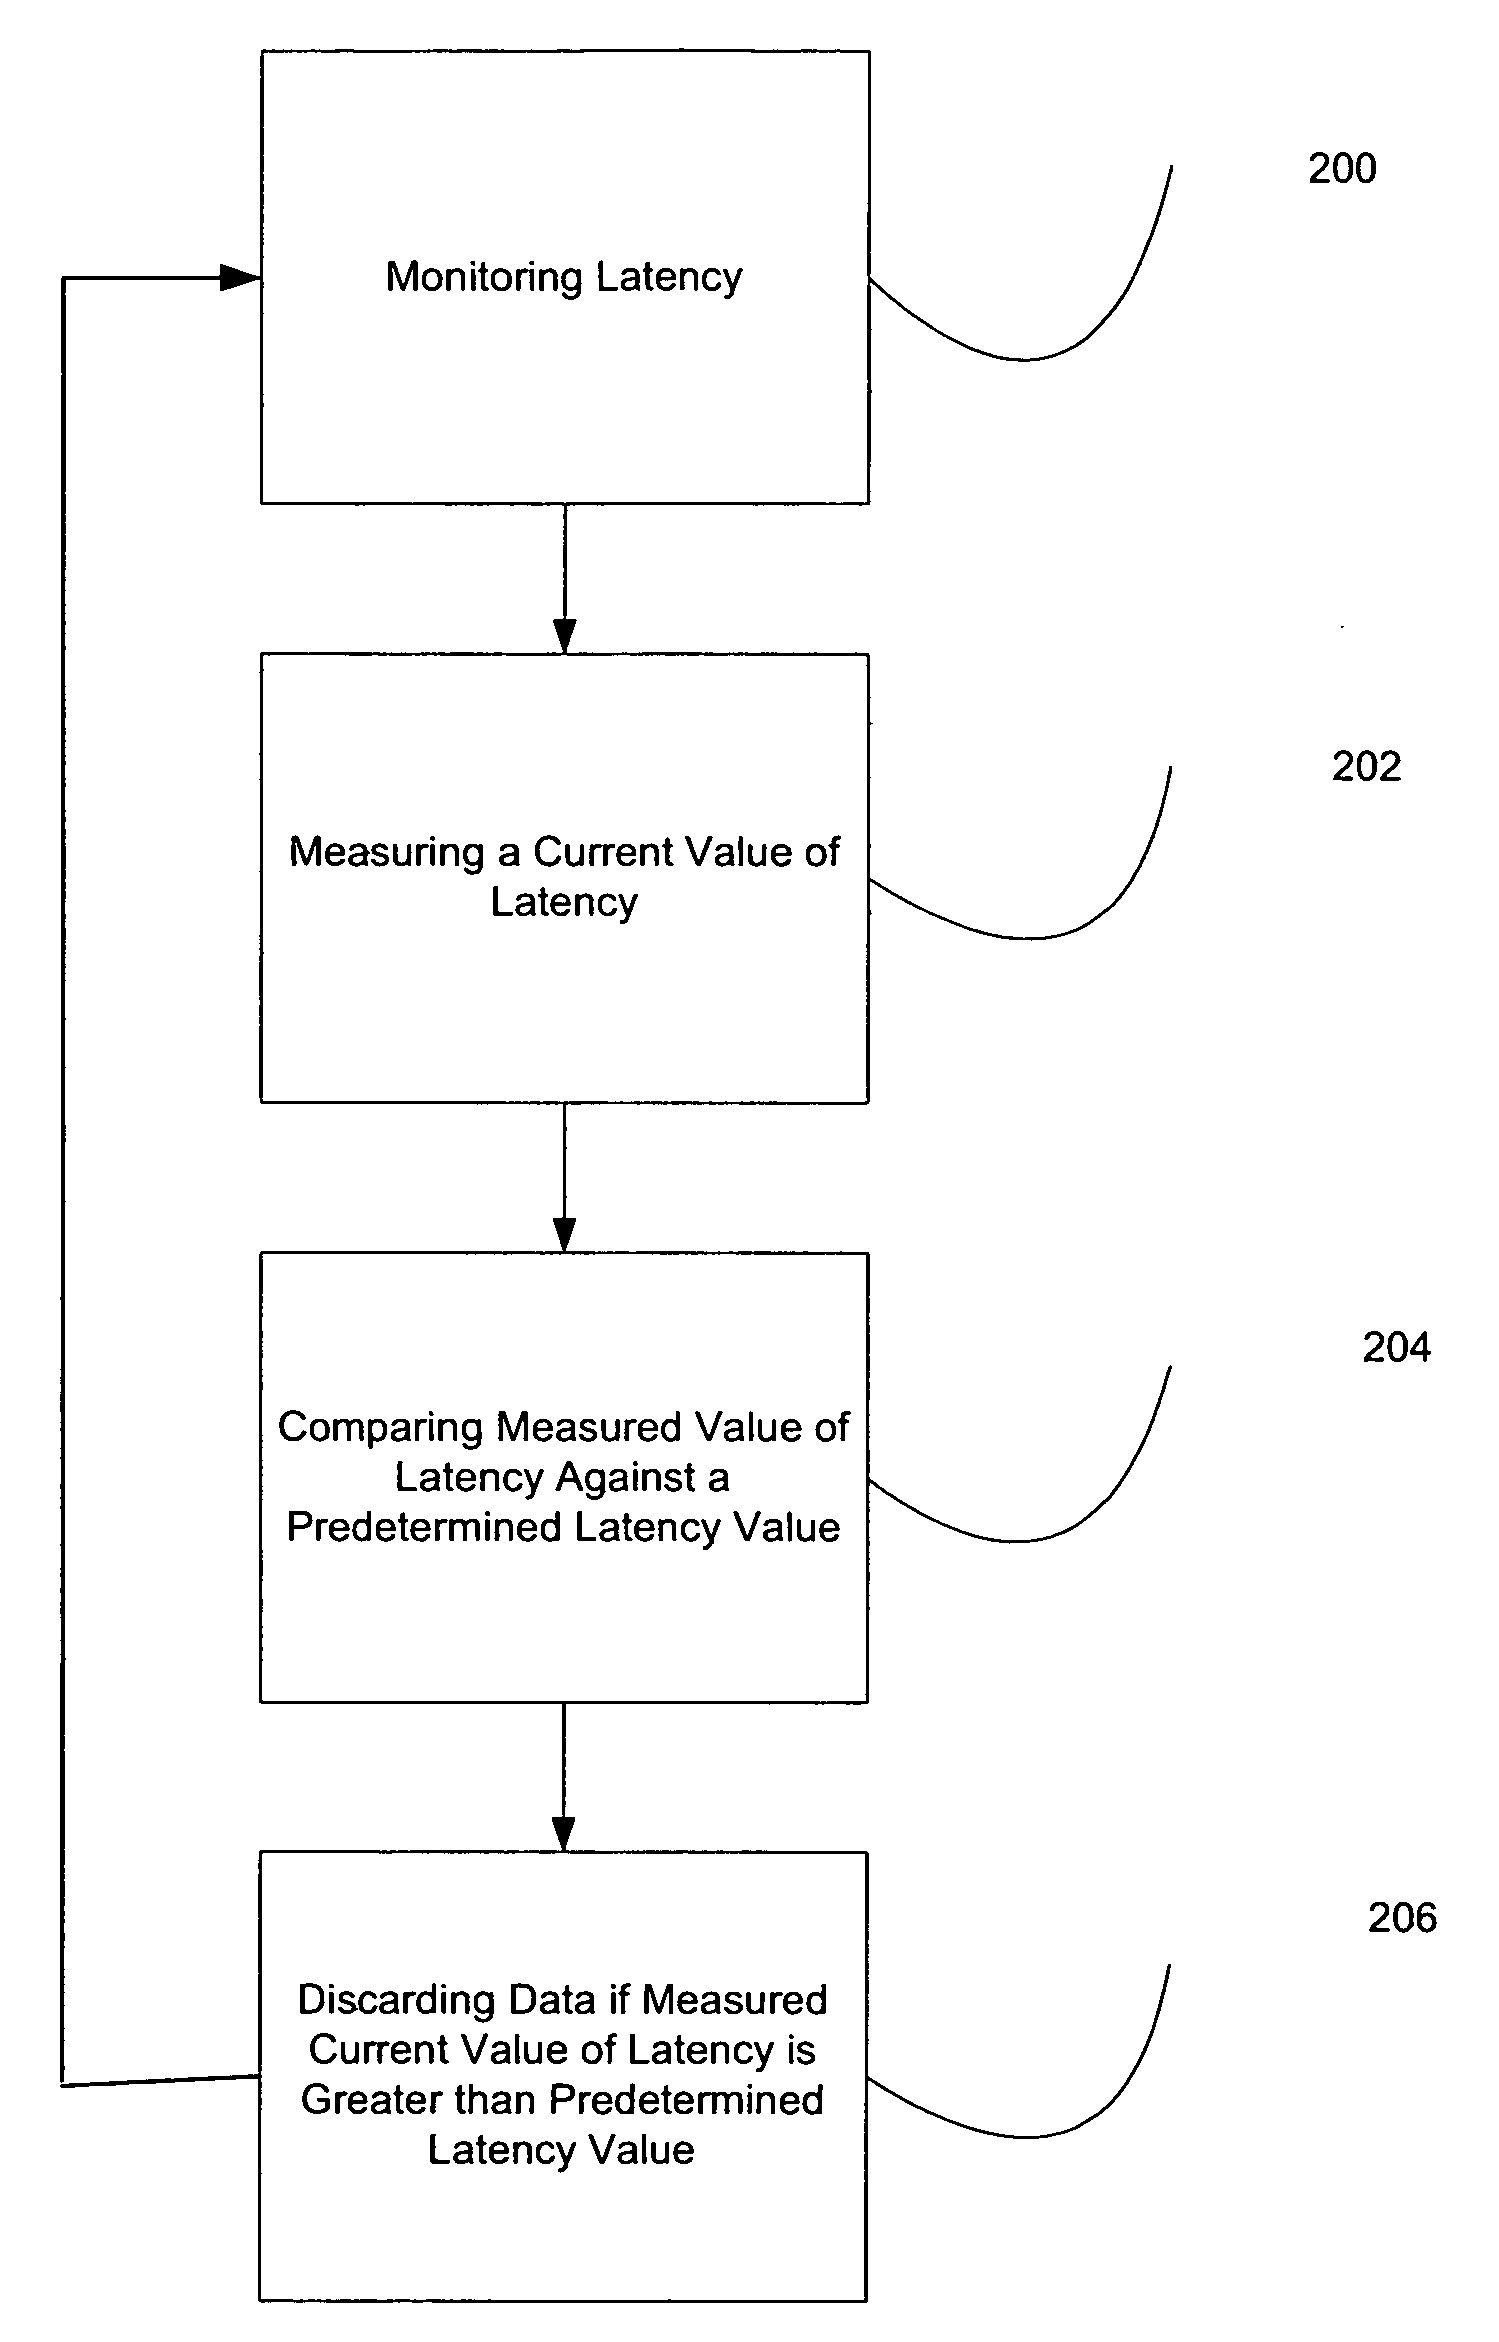 Method and apparatus to adaptively manage end-to-end voice over internet protocol (VolP) media latency